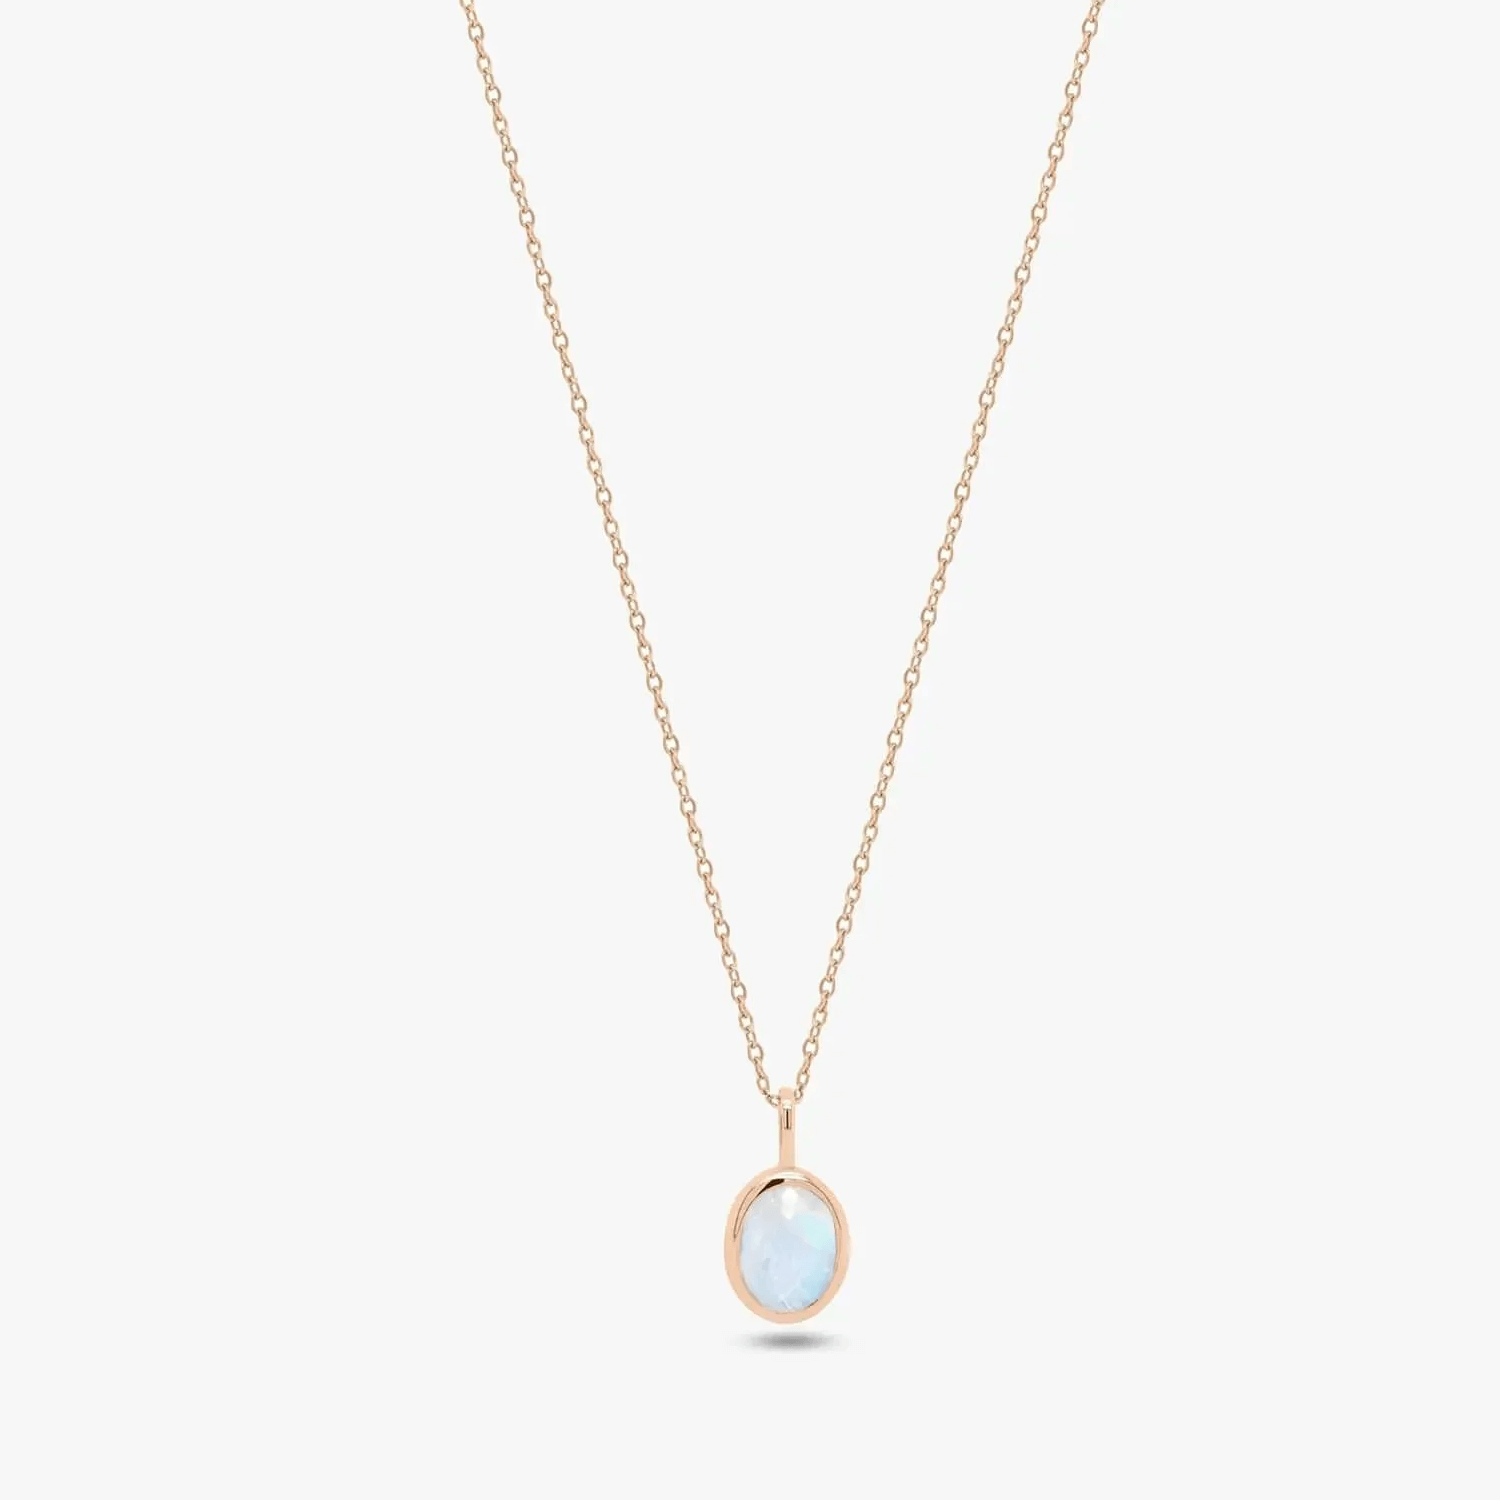 Champagne Rose silver necklace - Moonstone